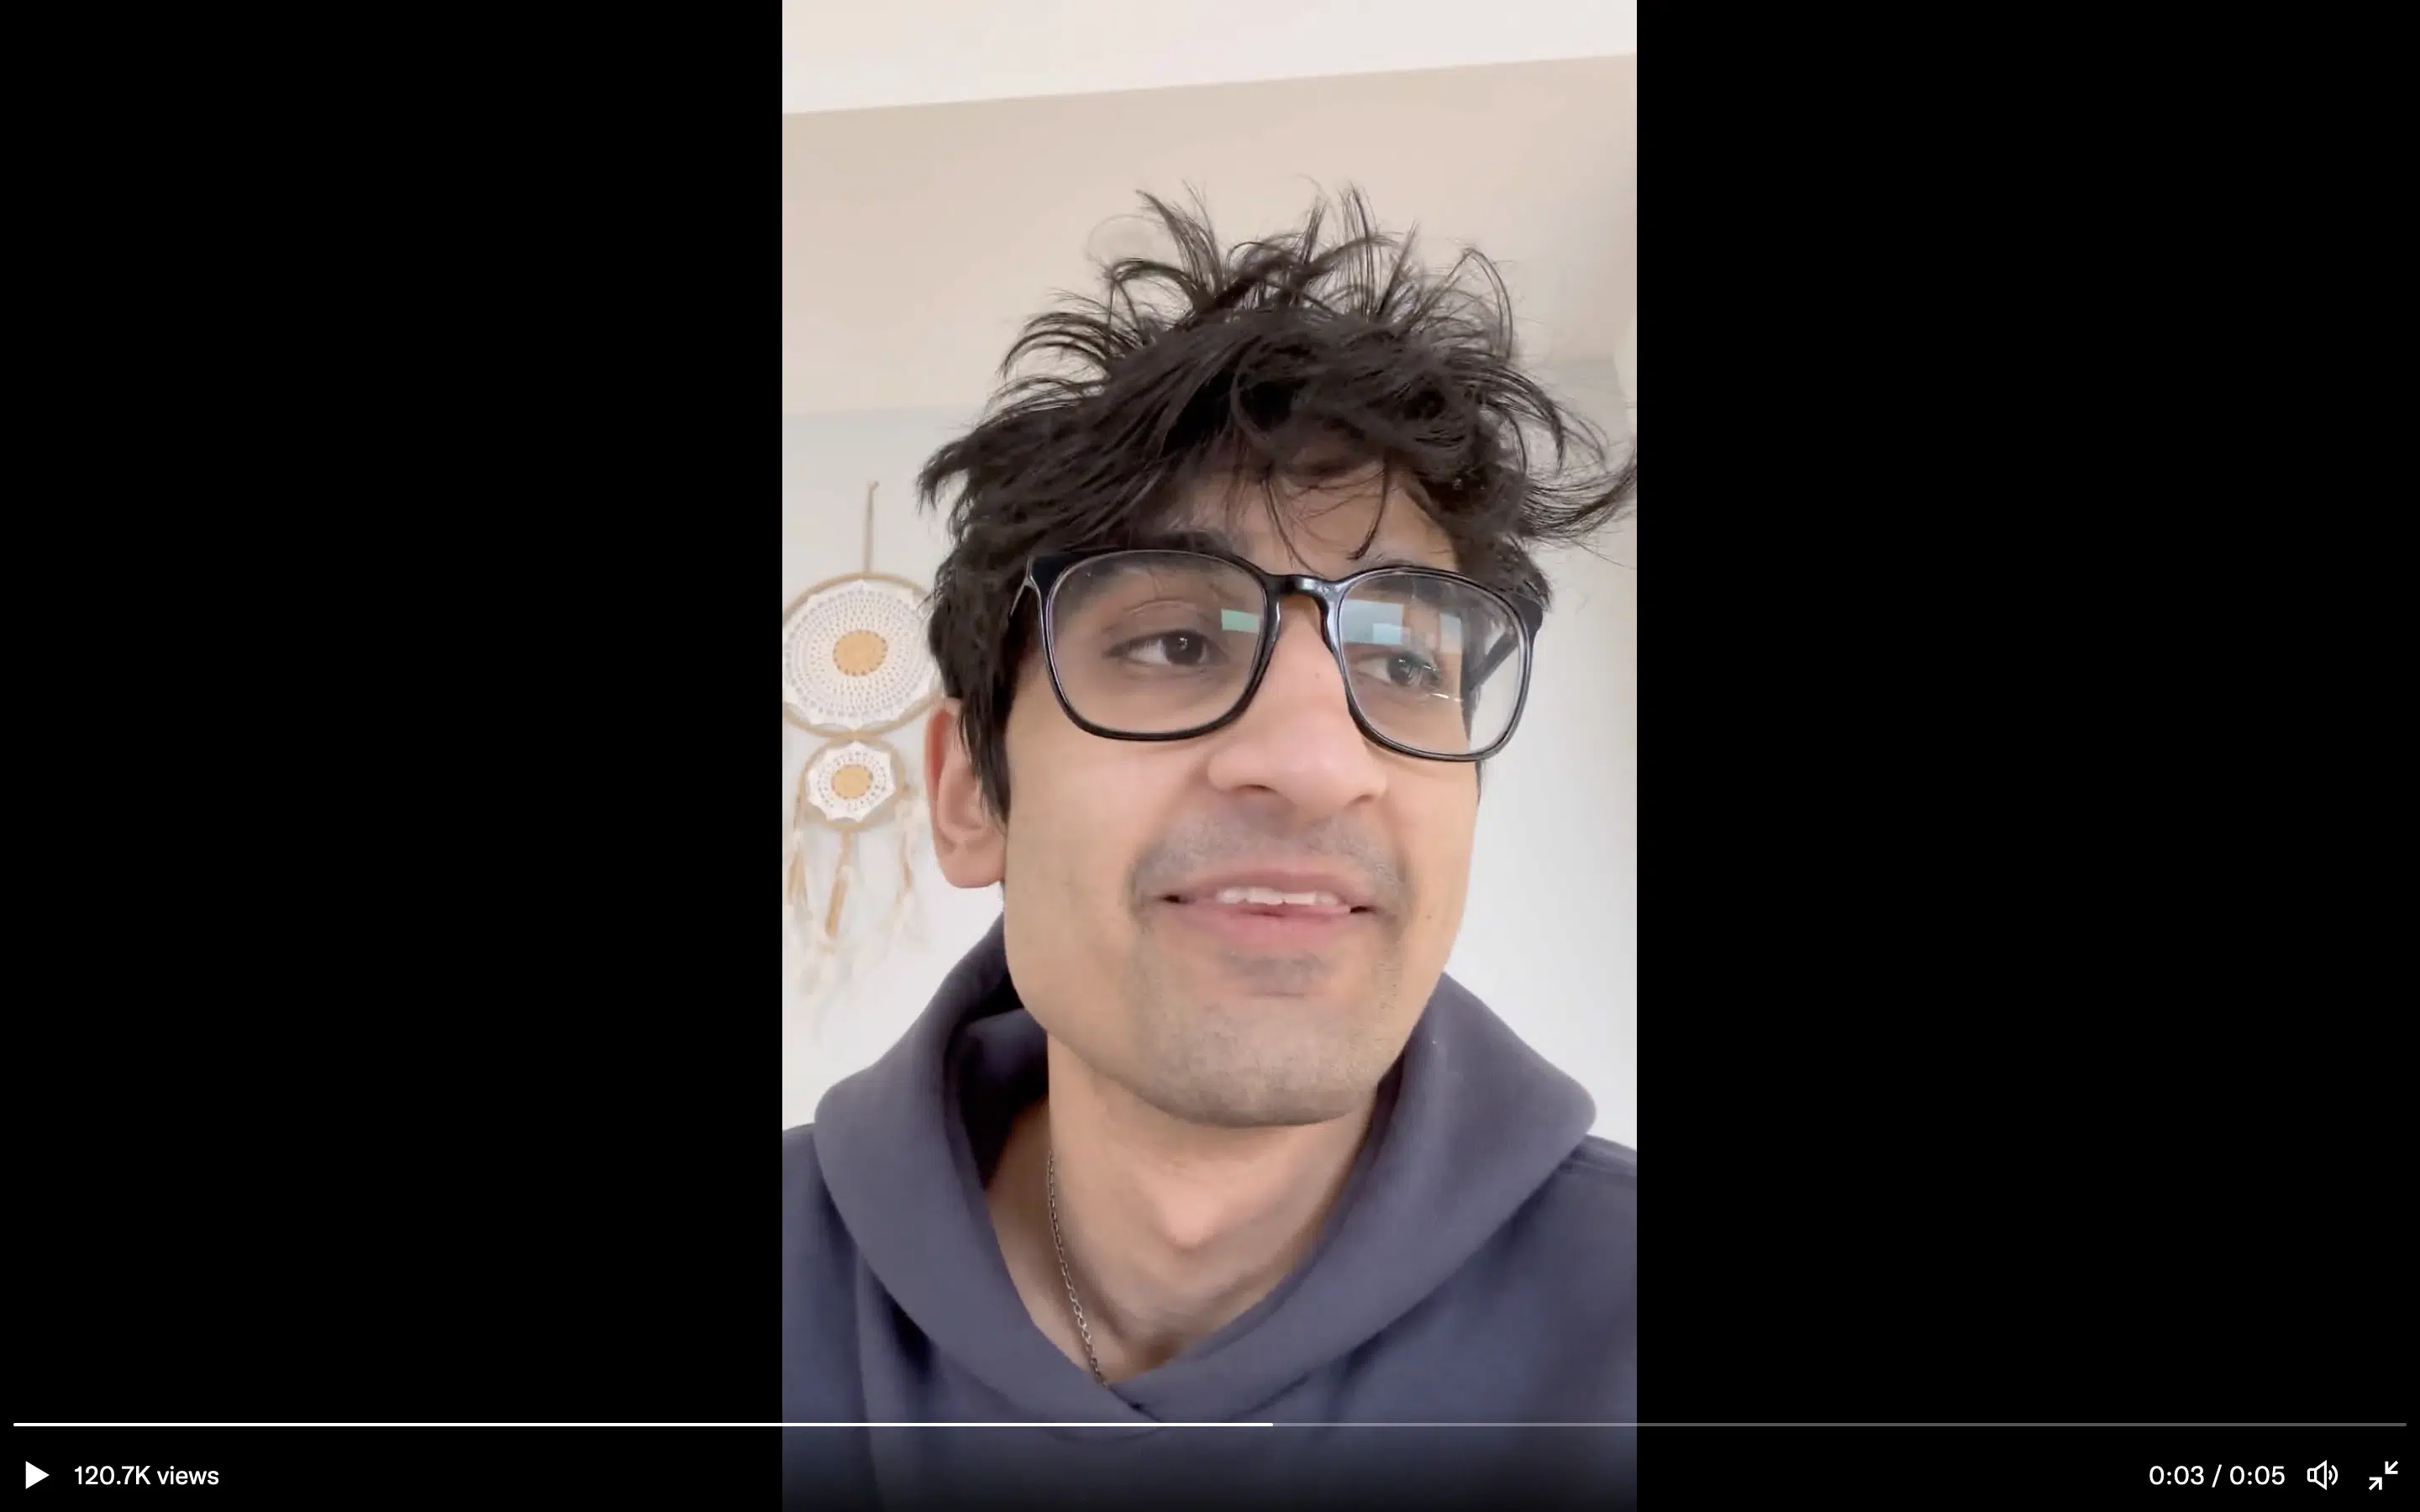 A man with messy hair, glasses, and a grey sweatshirt speaks to the camera. It is Frank DeGods Doxxing himself.